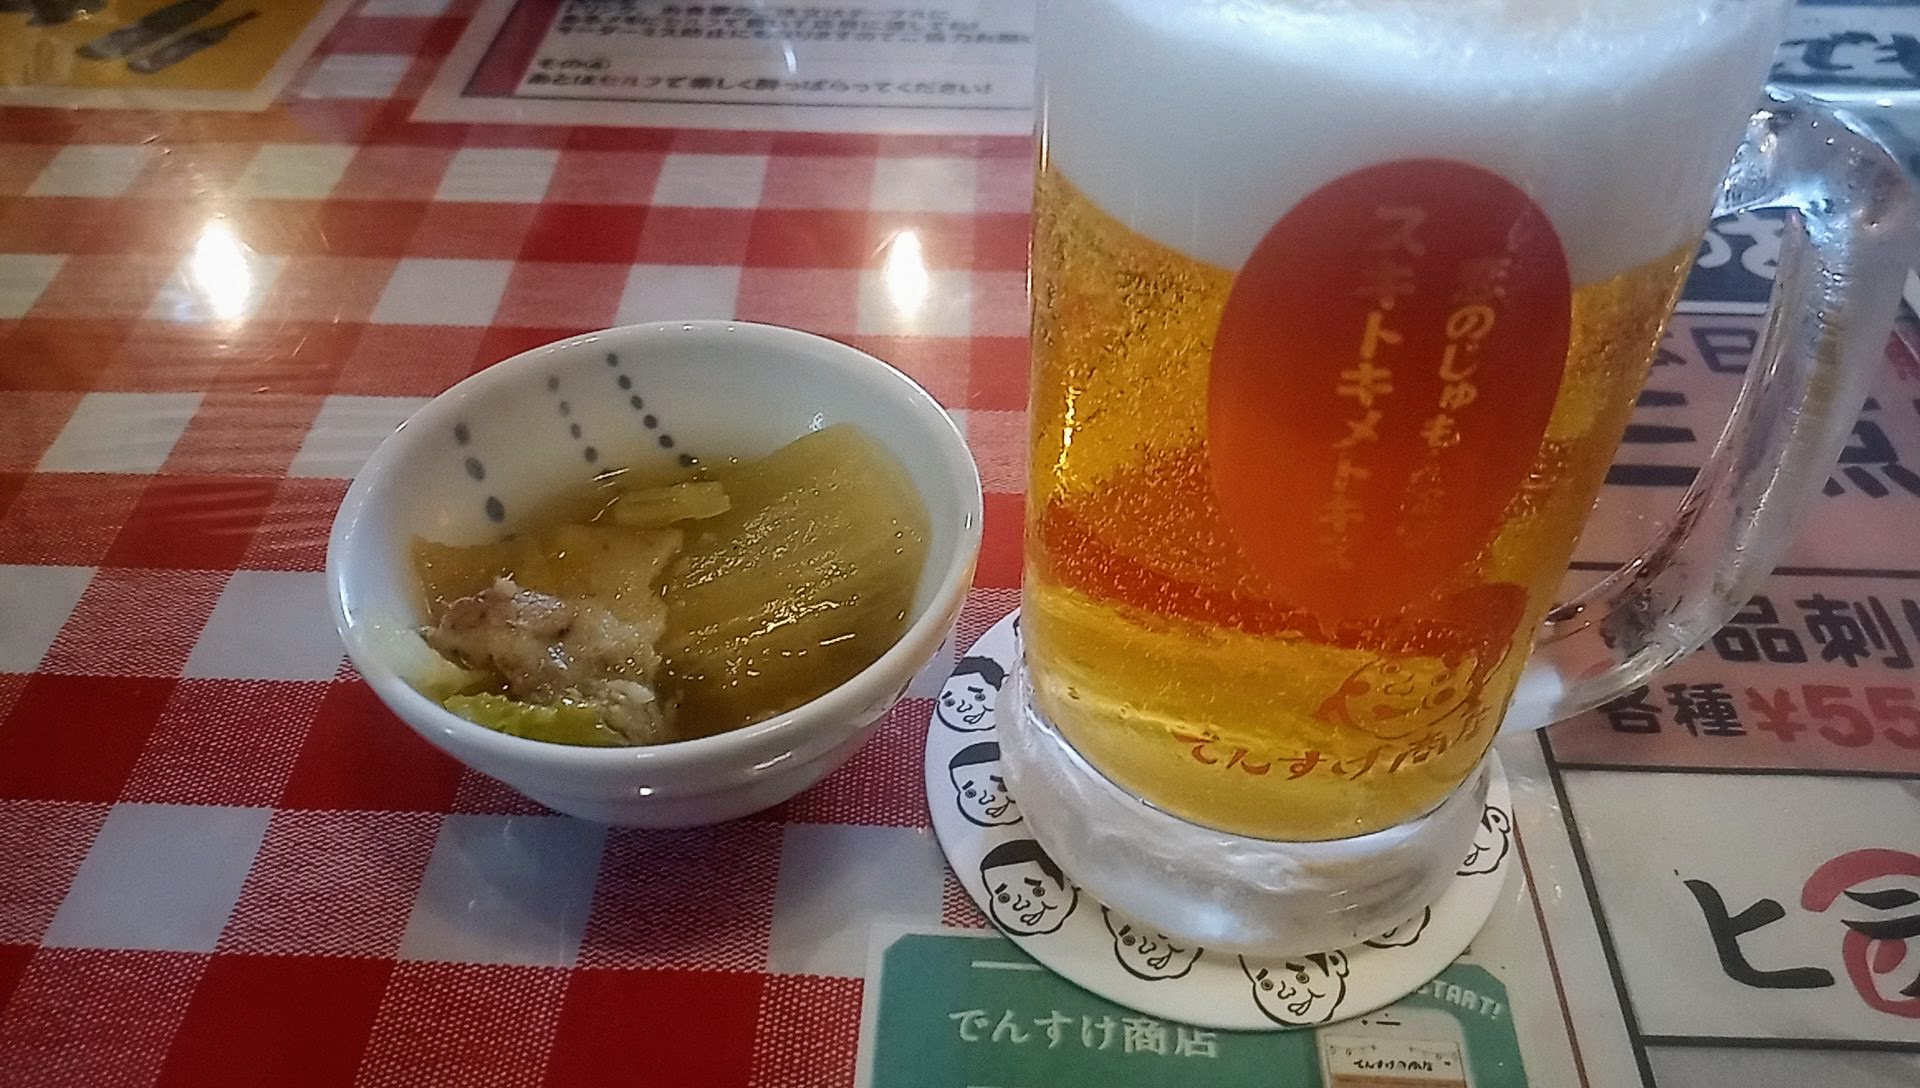 This is Densuke Shouten's draft beer and today's snack